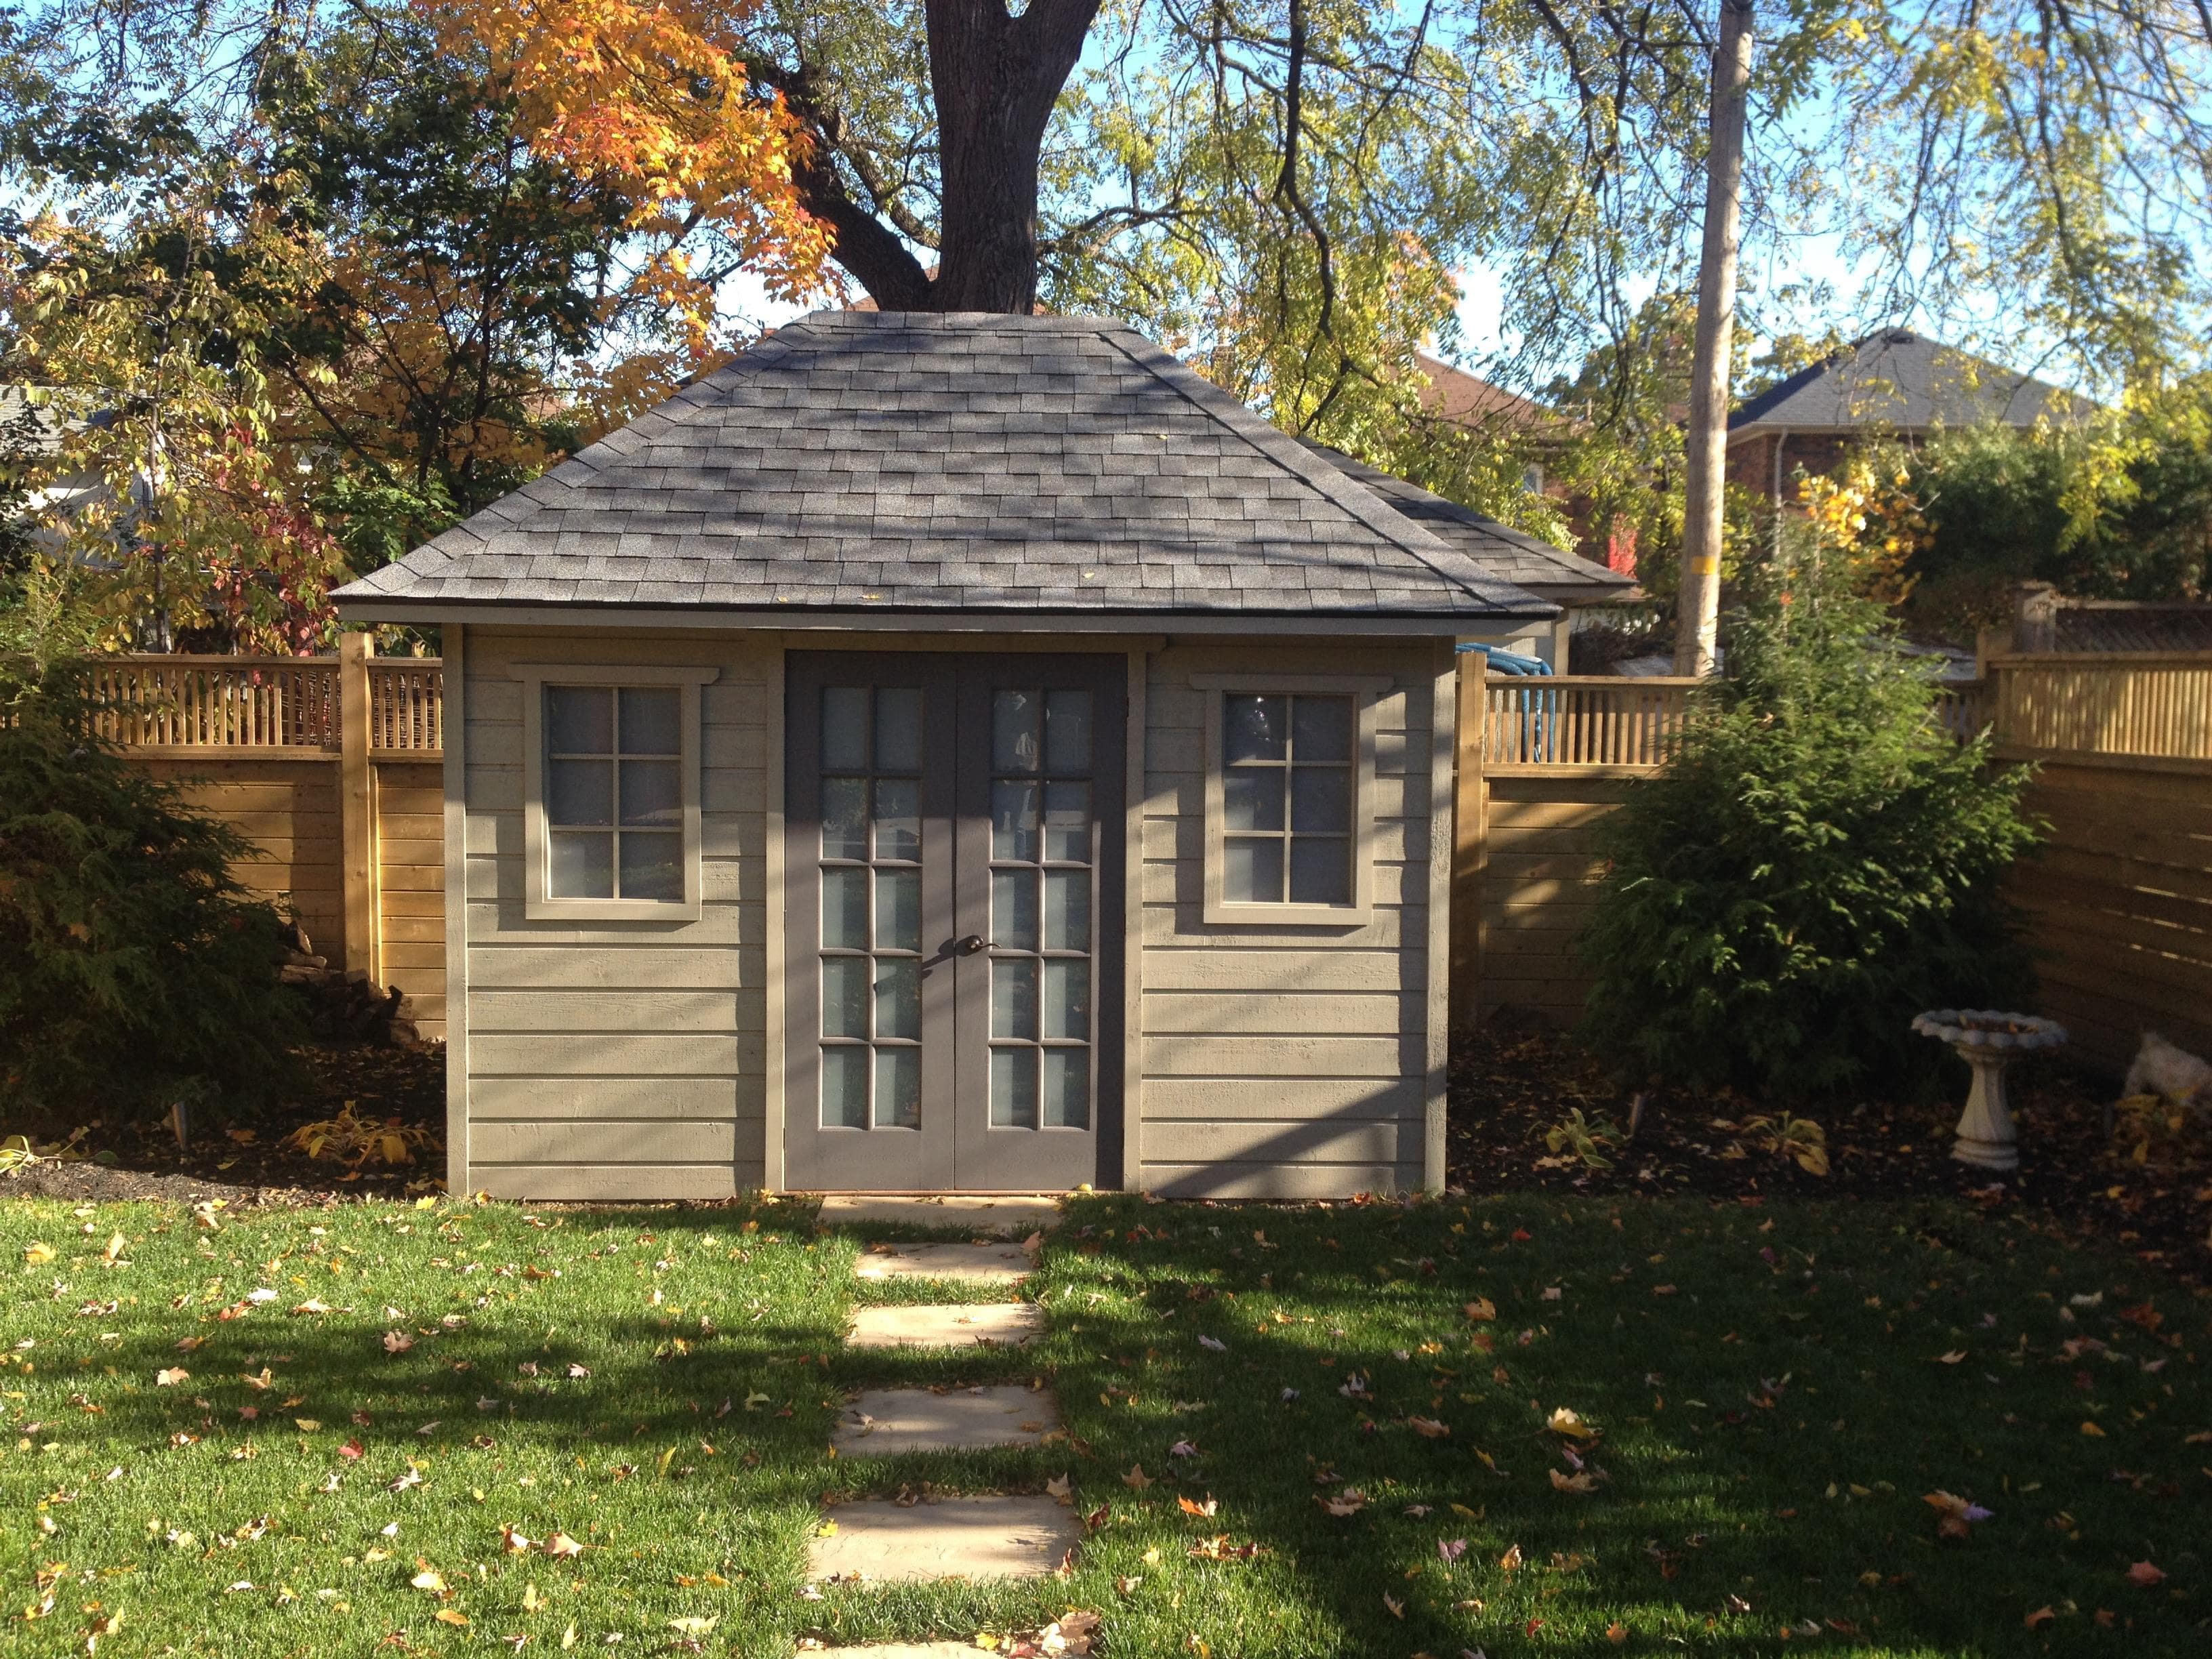 Sonoma 8x12 garden shed with standard fixed window In Toronto Ontario. ID number 200534-2